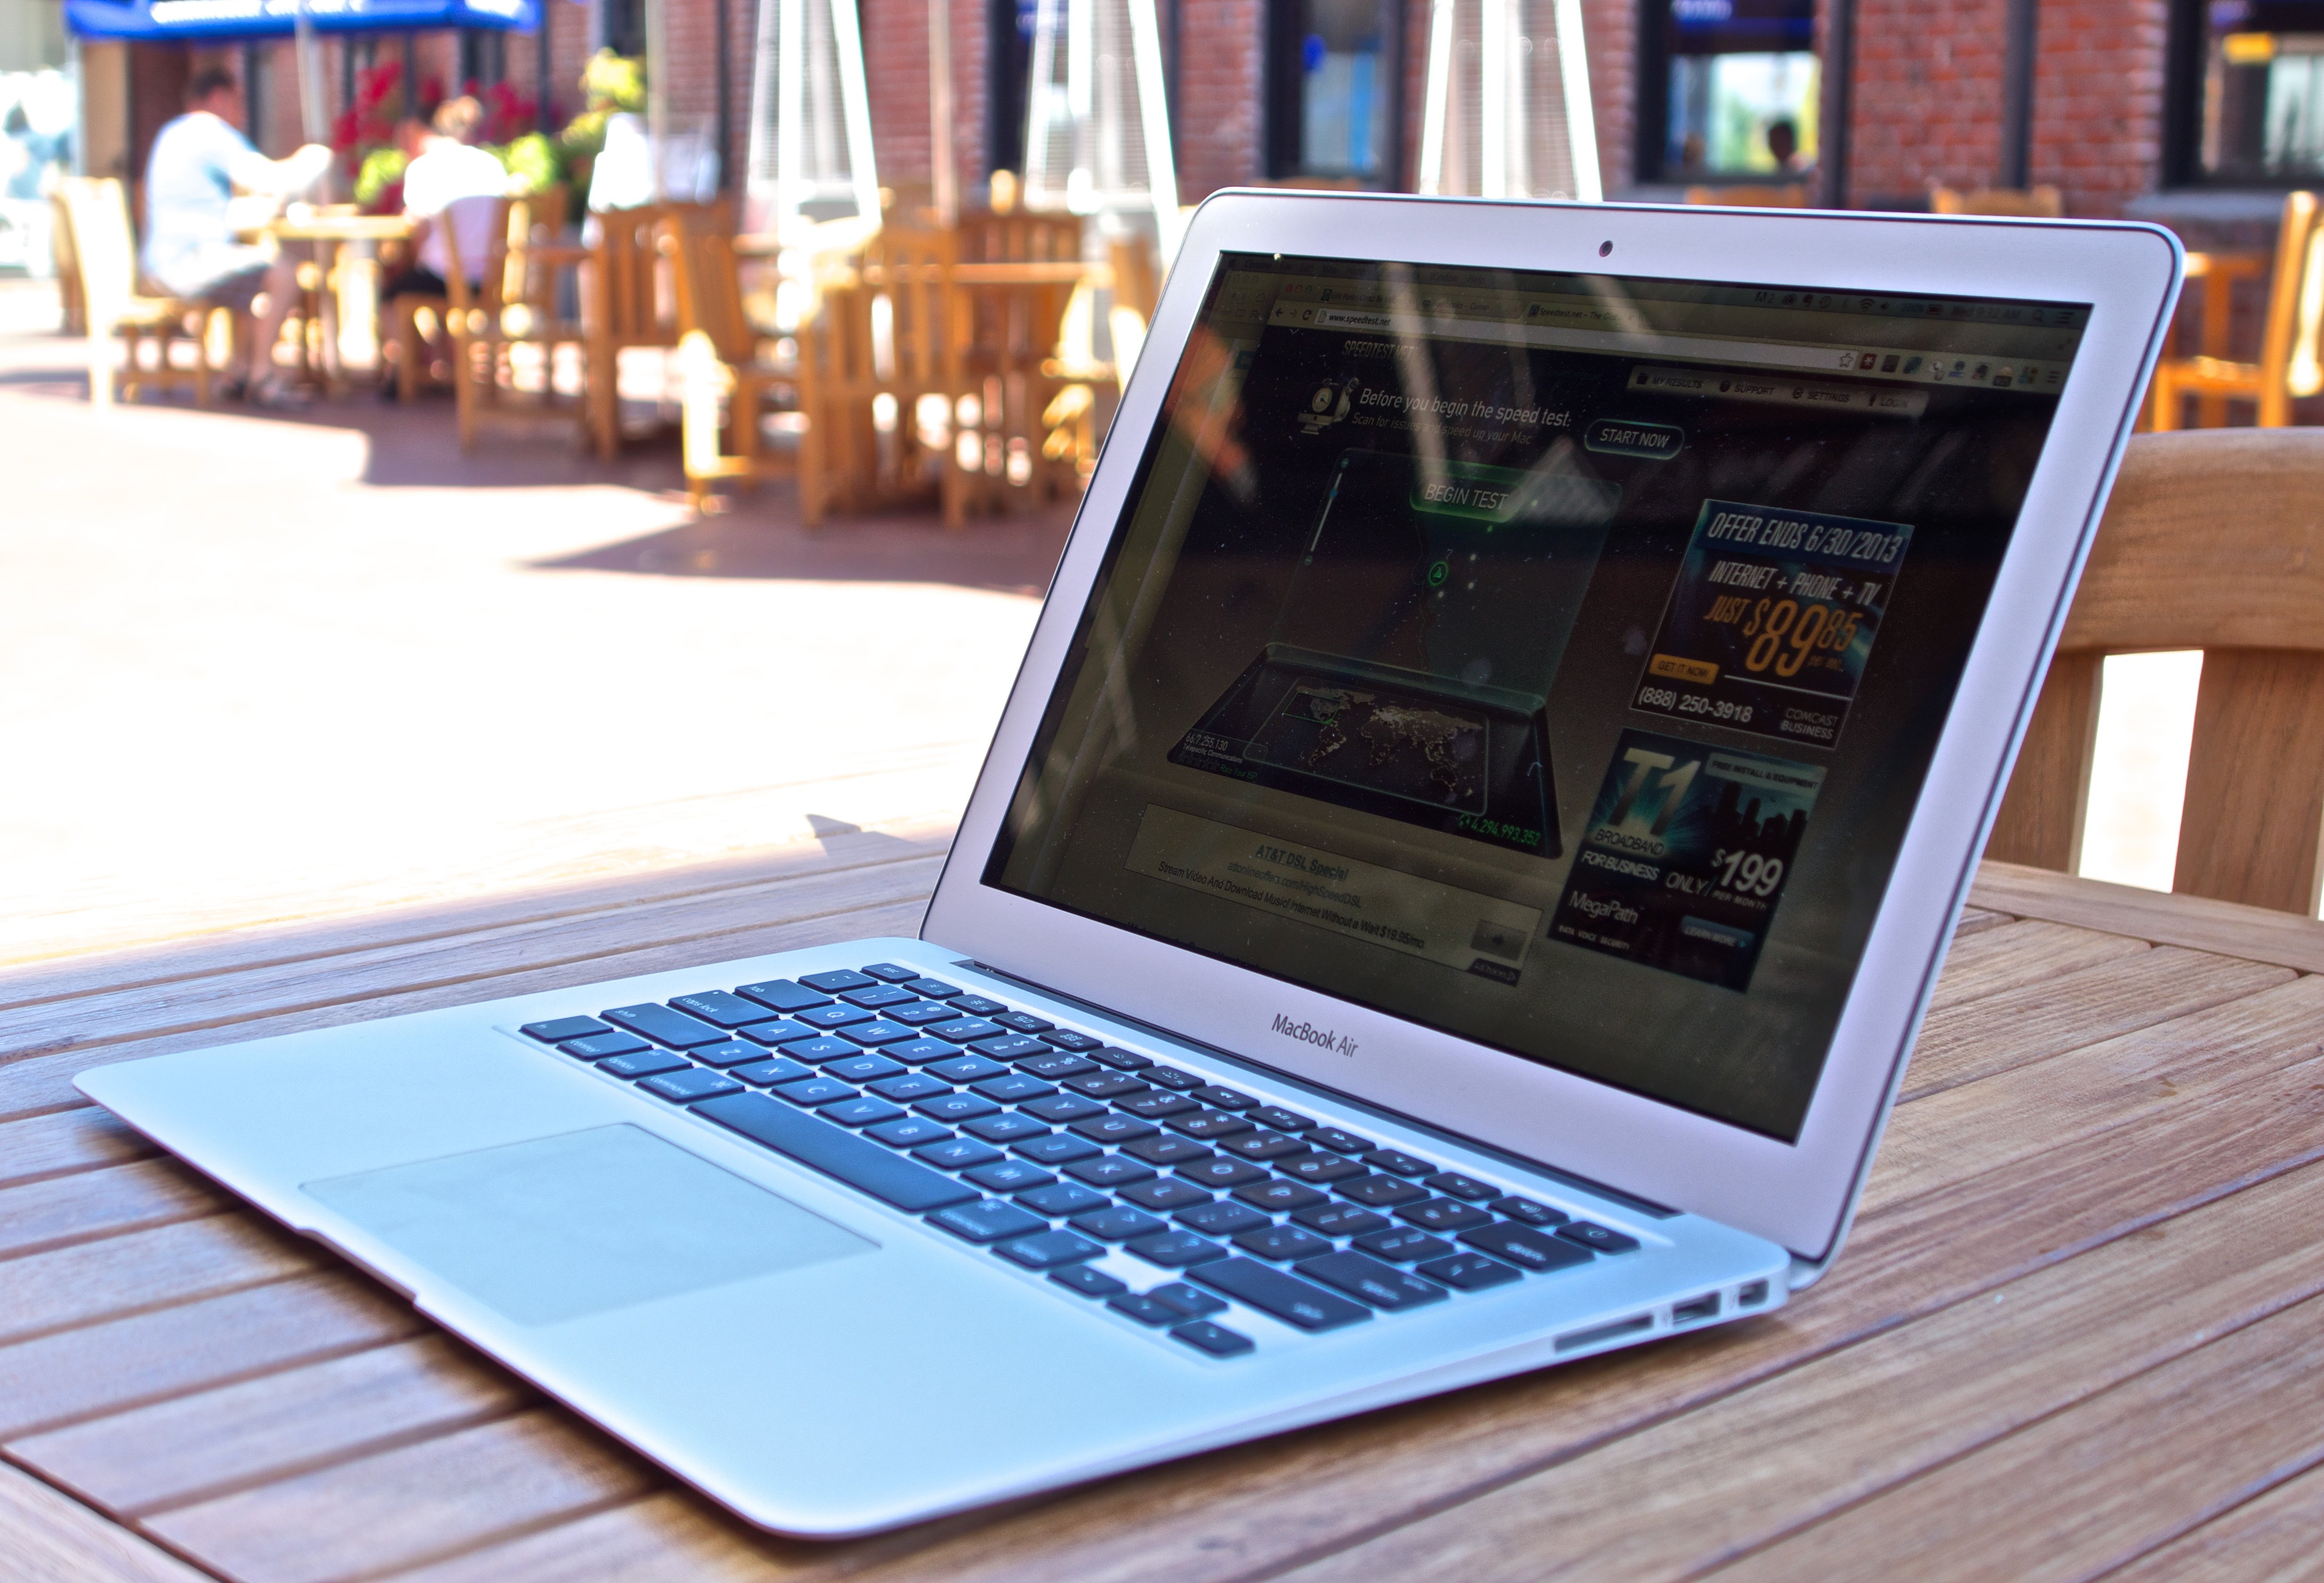 There is no matte option, but when comparing the MacBook Air vs MacBook Pro Retina, the Air may be a better option.